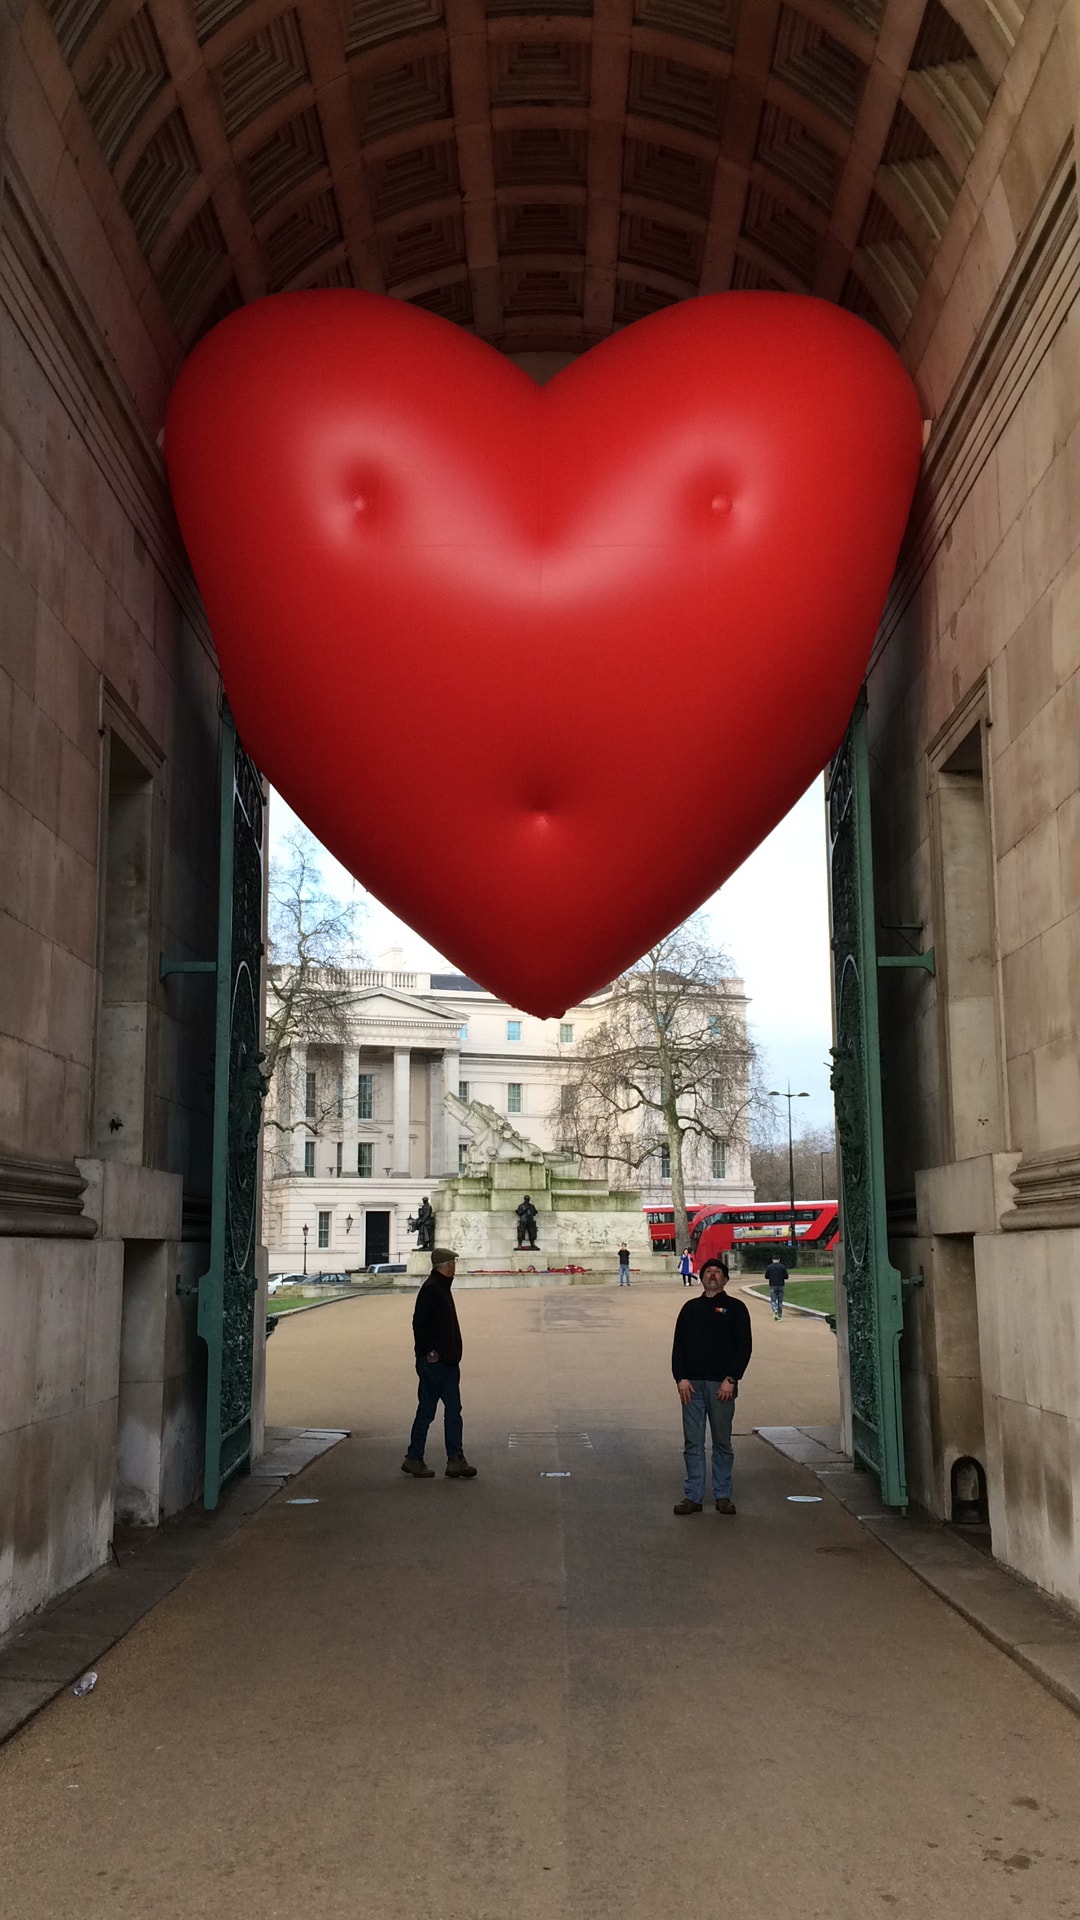 Inflatable chubby heart in archway with 2 people below